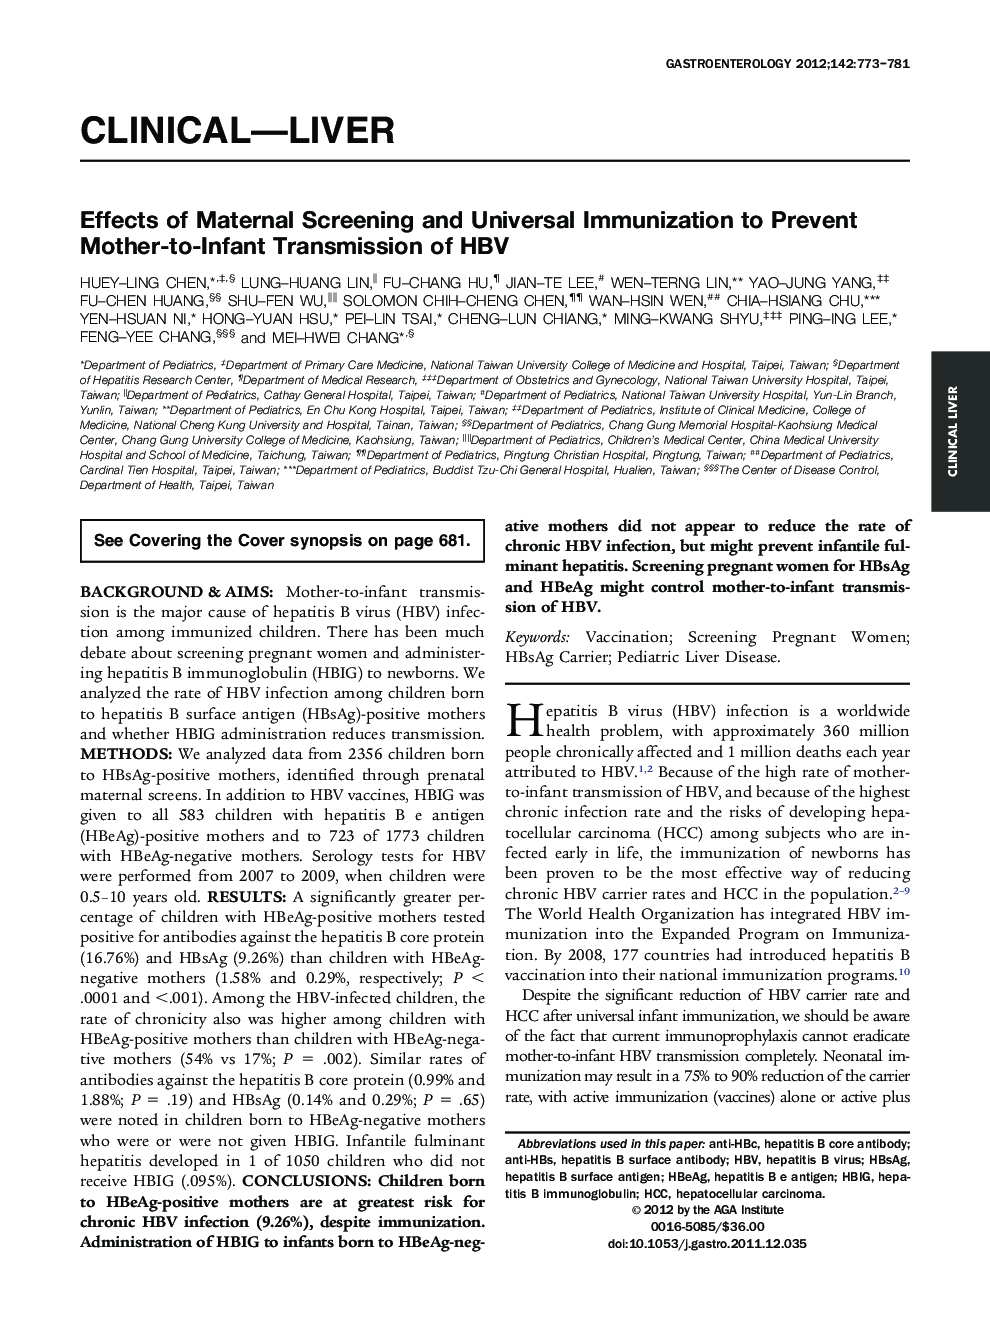 Effects of Maternal Screening and Universal Immunization to Prevent Mother-to-Infant Transmission of HBV